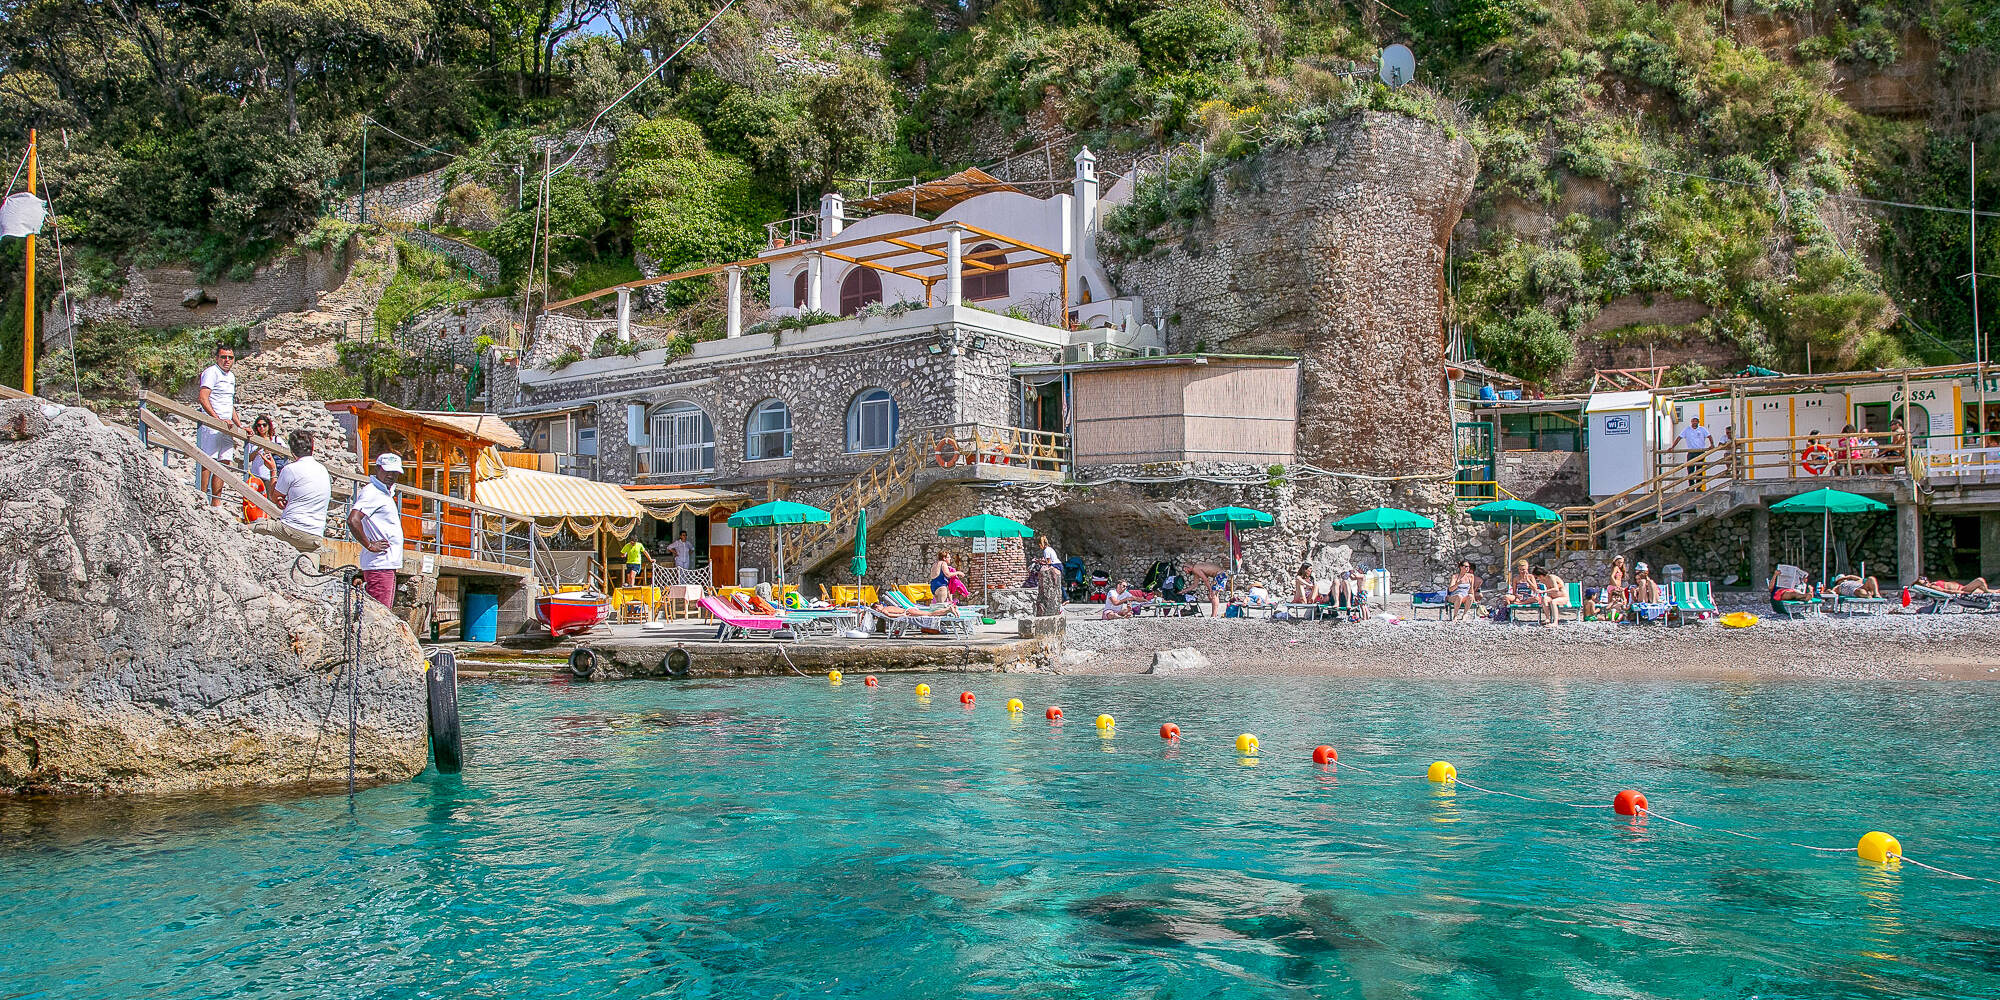 A beach club, restaurant, and boat<br>for the perfect day on Capri